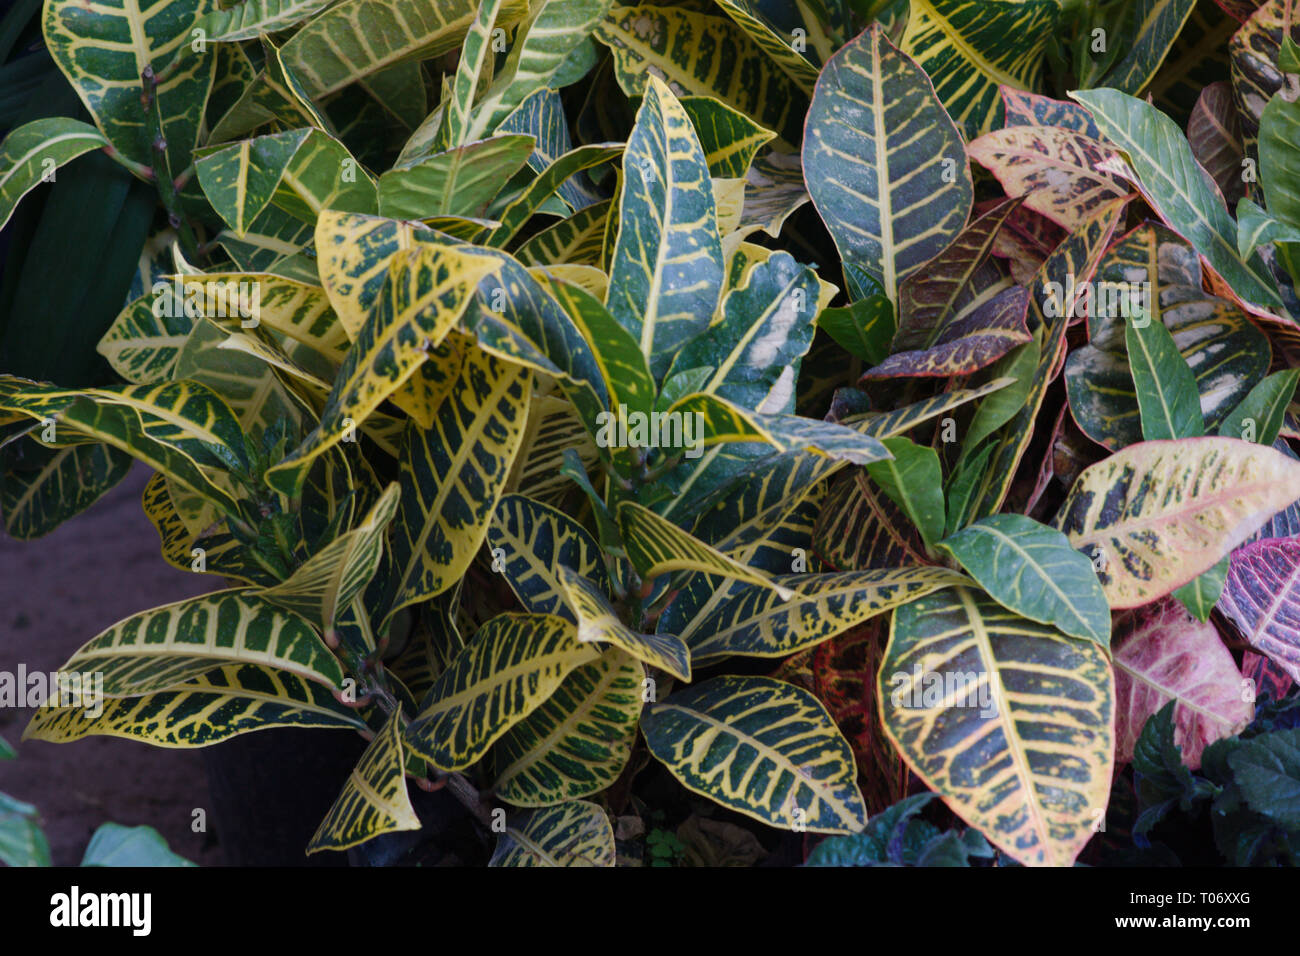 Green and yellow veined foliage Croton plant from San Miguel de Allende Juarez Park Candelaria 2019 Stock Photo